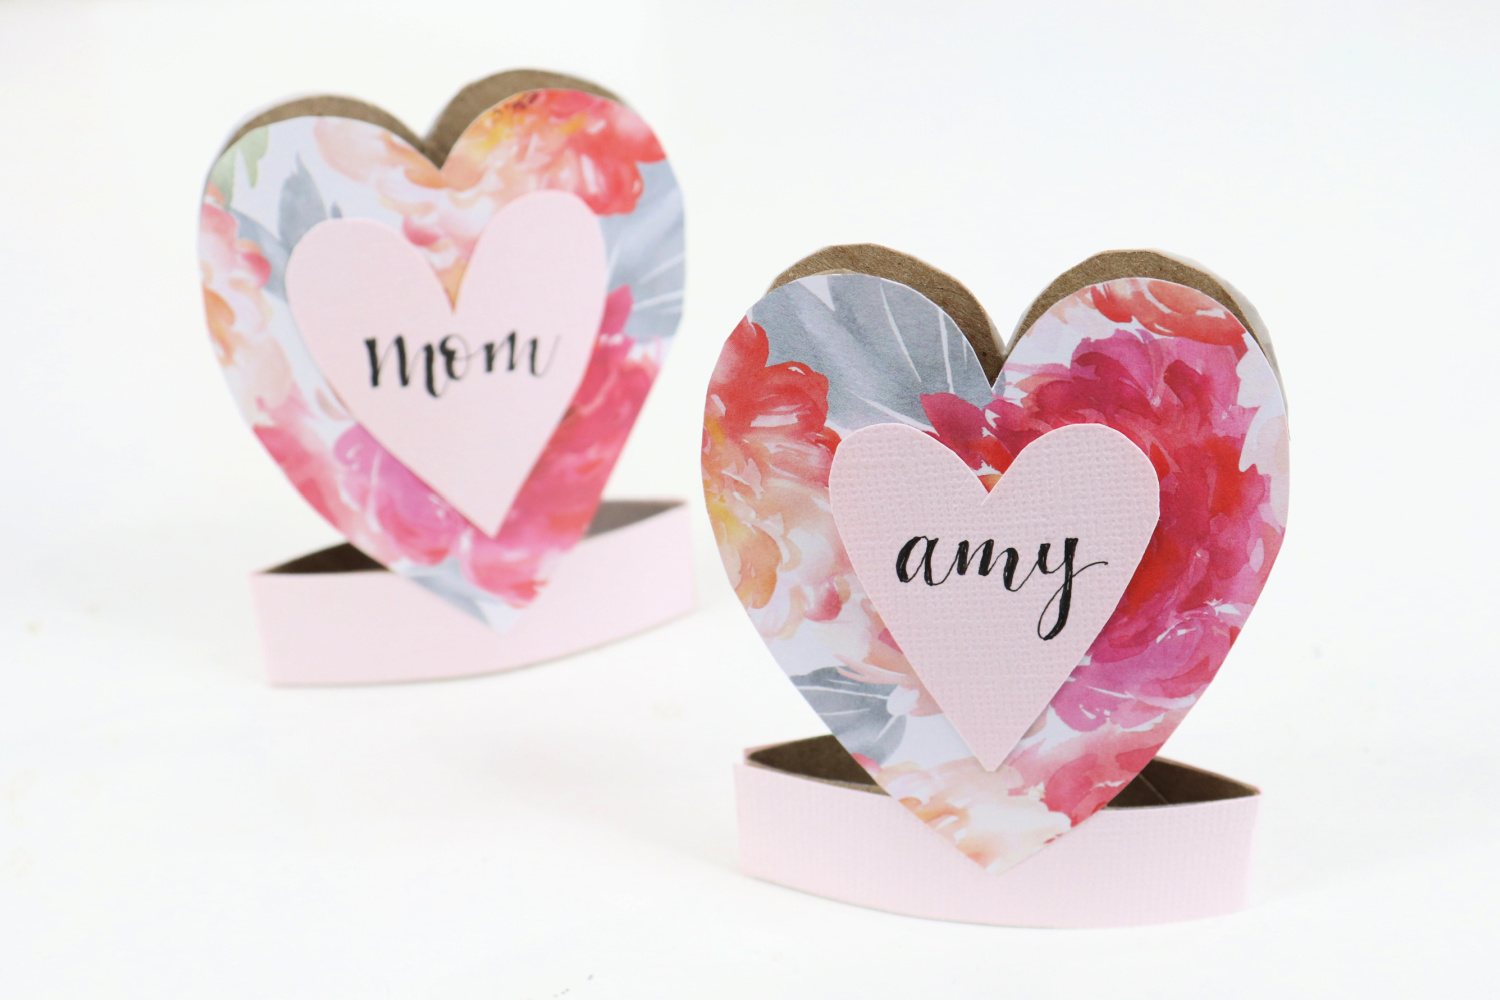 Image contains two finished Valentine paper roll projects on a white background.